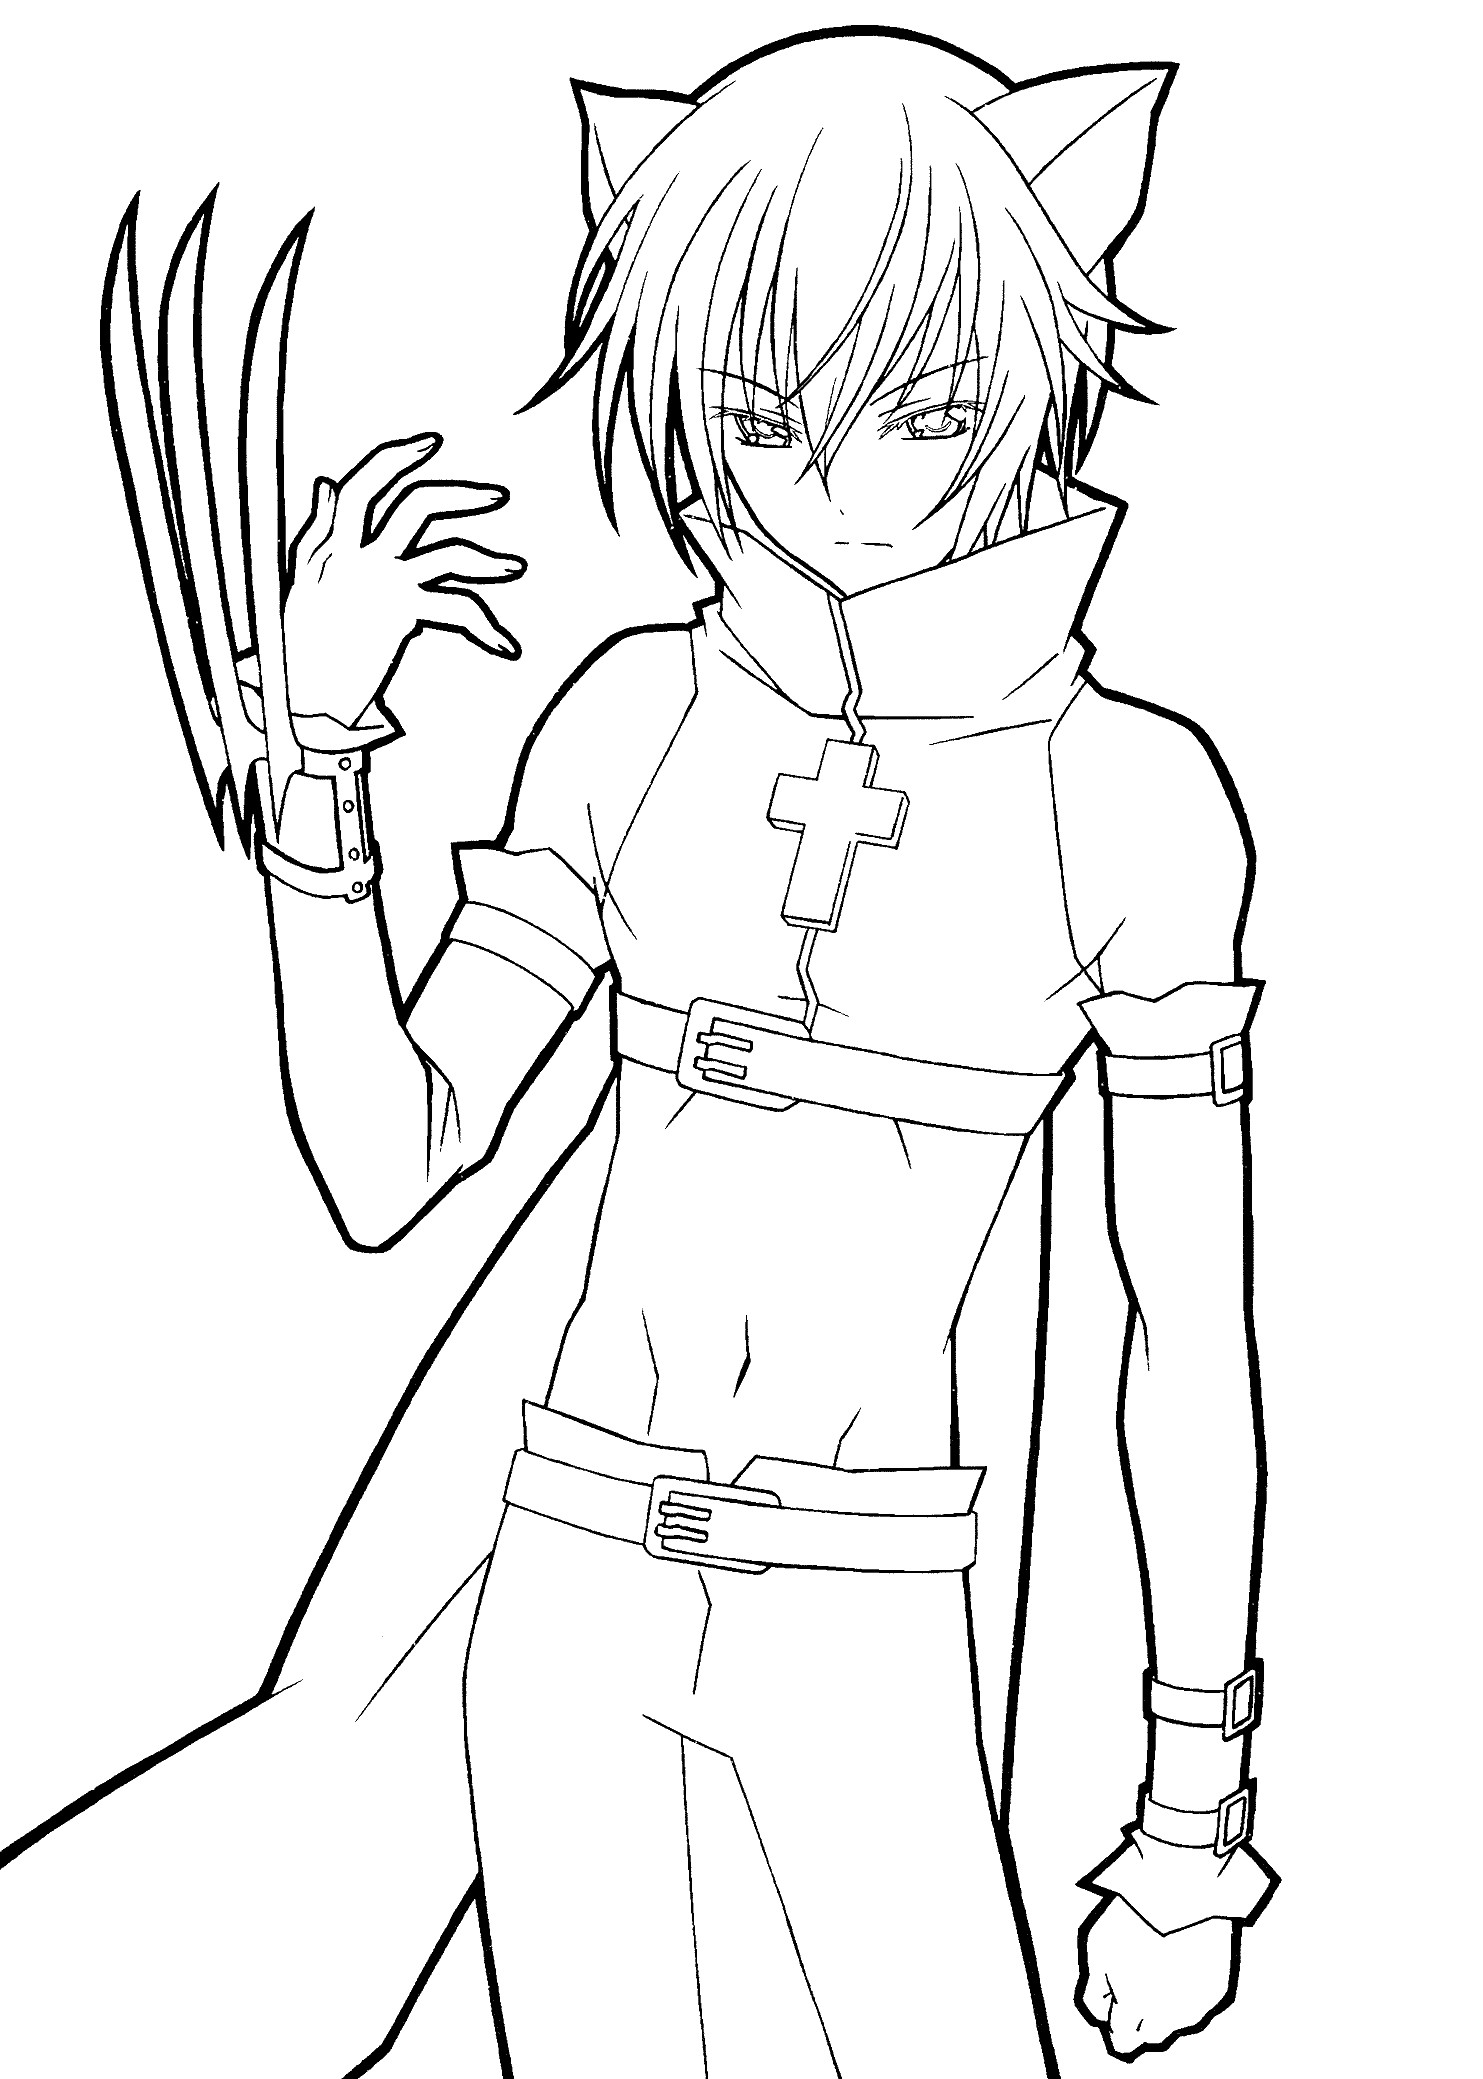 20 Ideas For Anime Boys Coloring Pages Easy   Best Coloring Pages ...